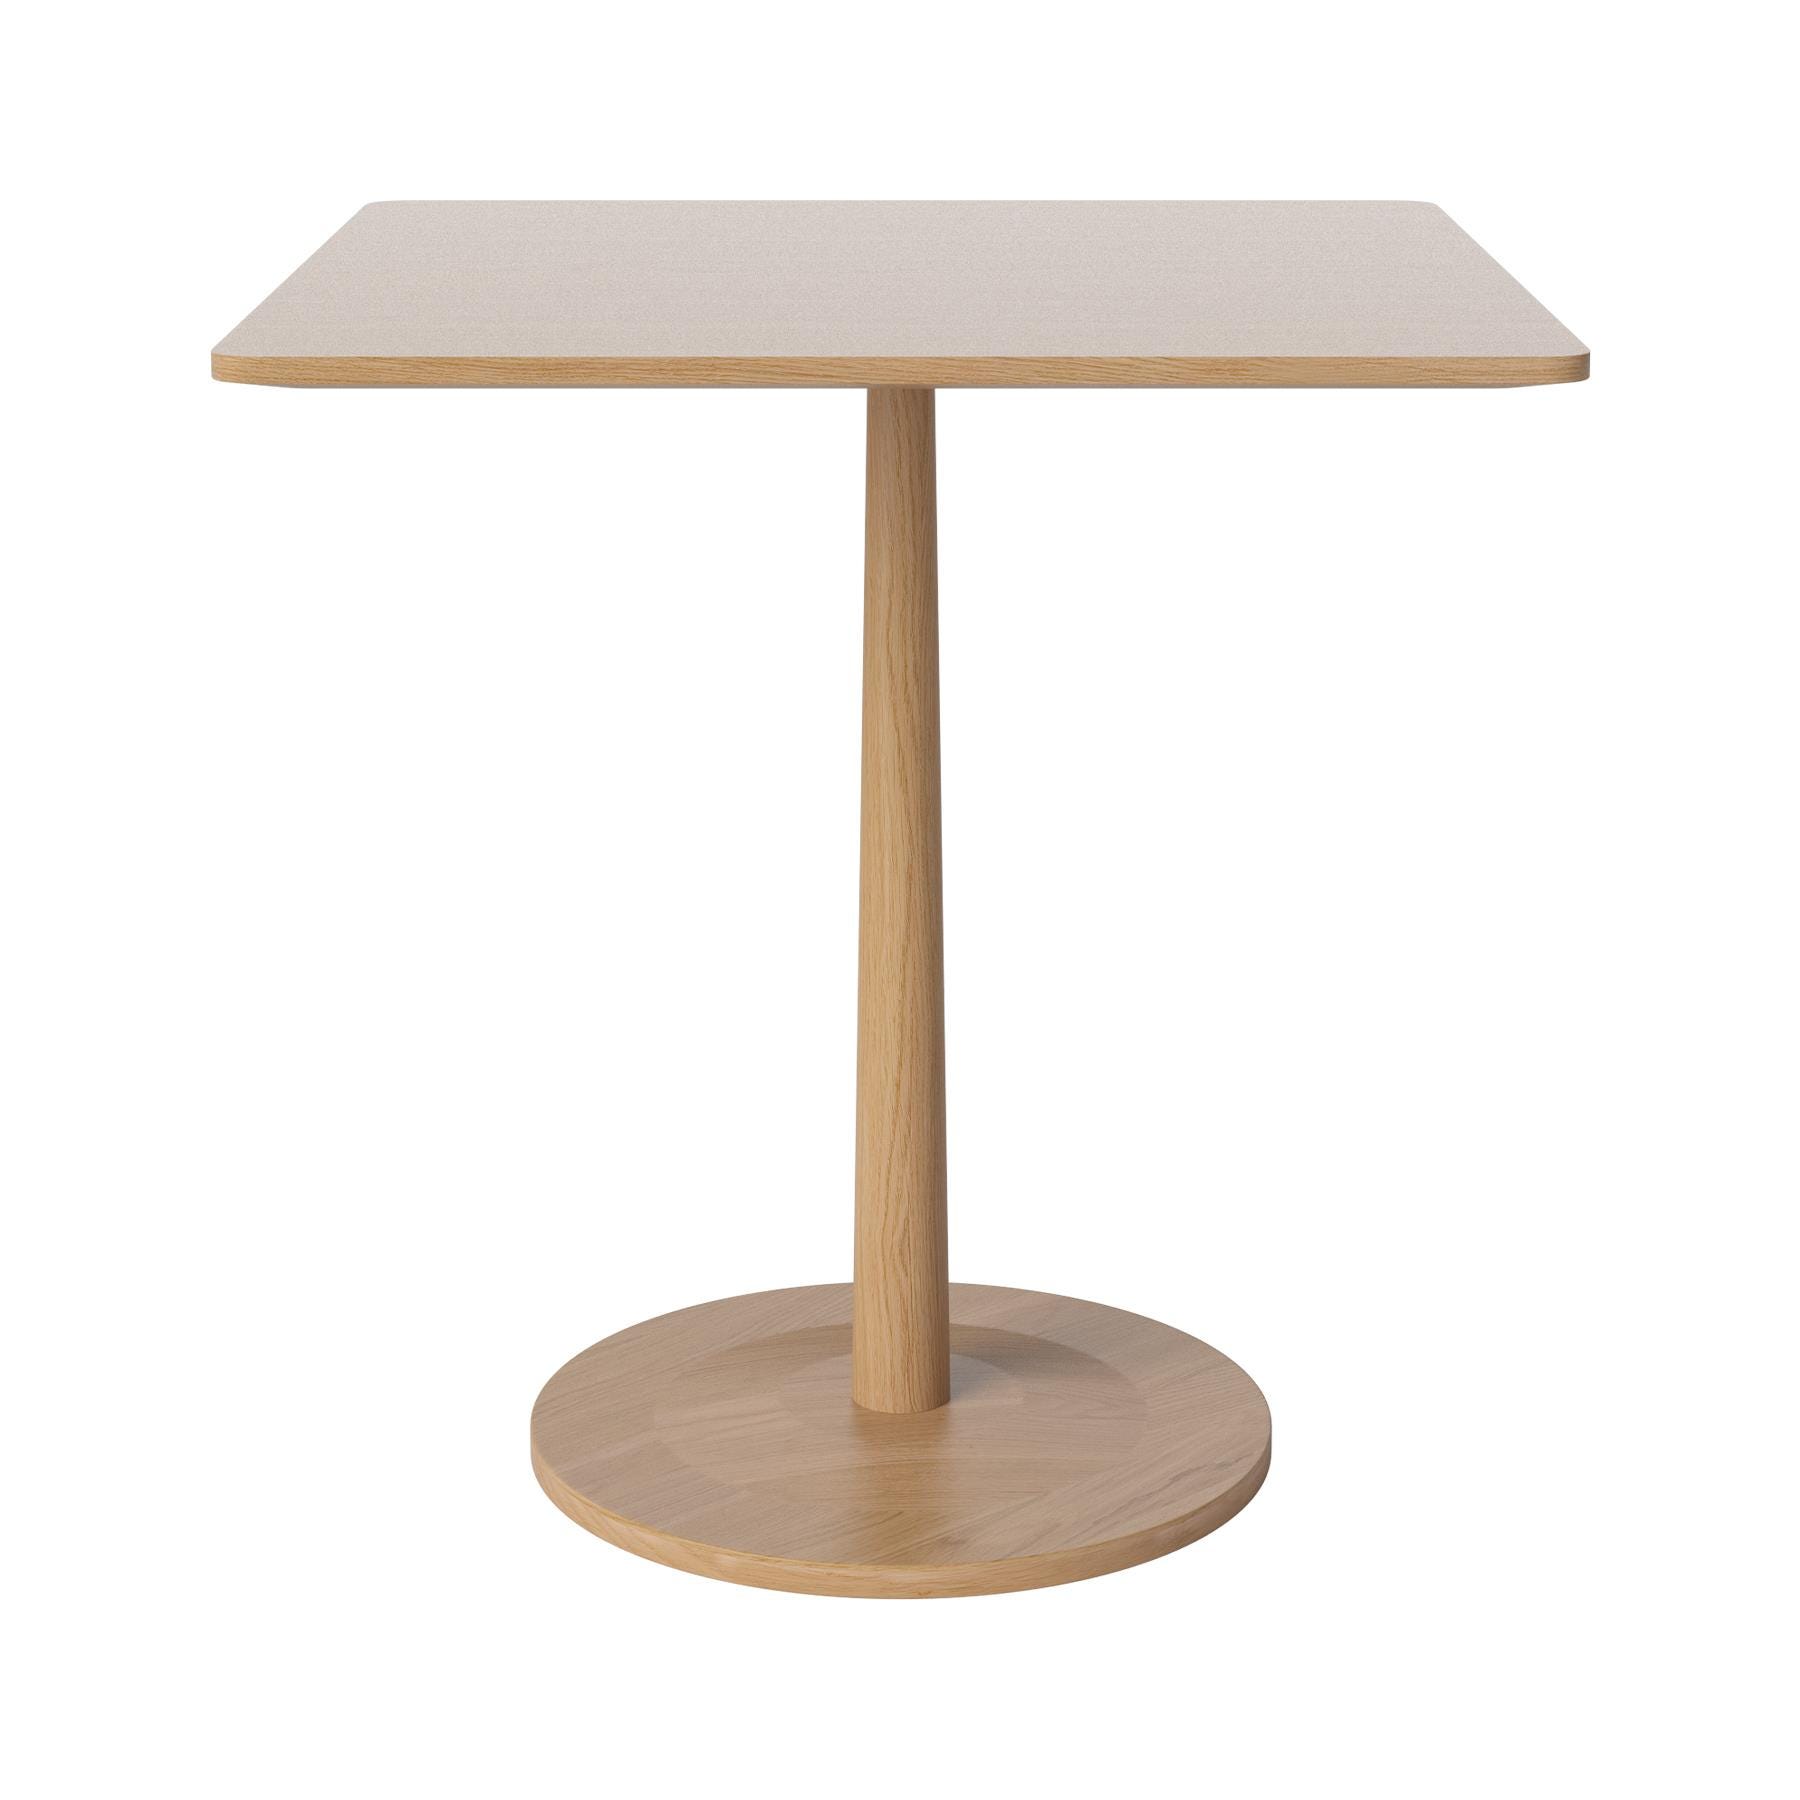 Bolia Turned Dining Table Square Lacquered Oak Light Wood Designer Furniture From Holloways Of Ludlow